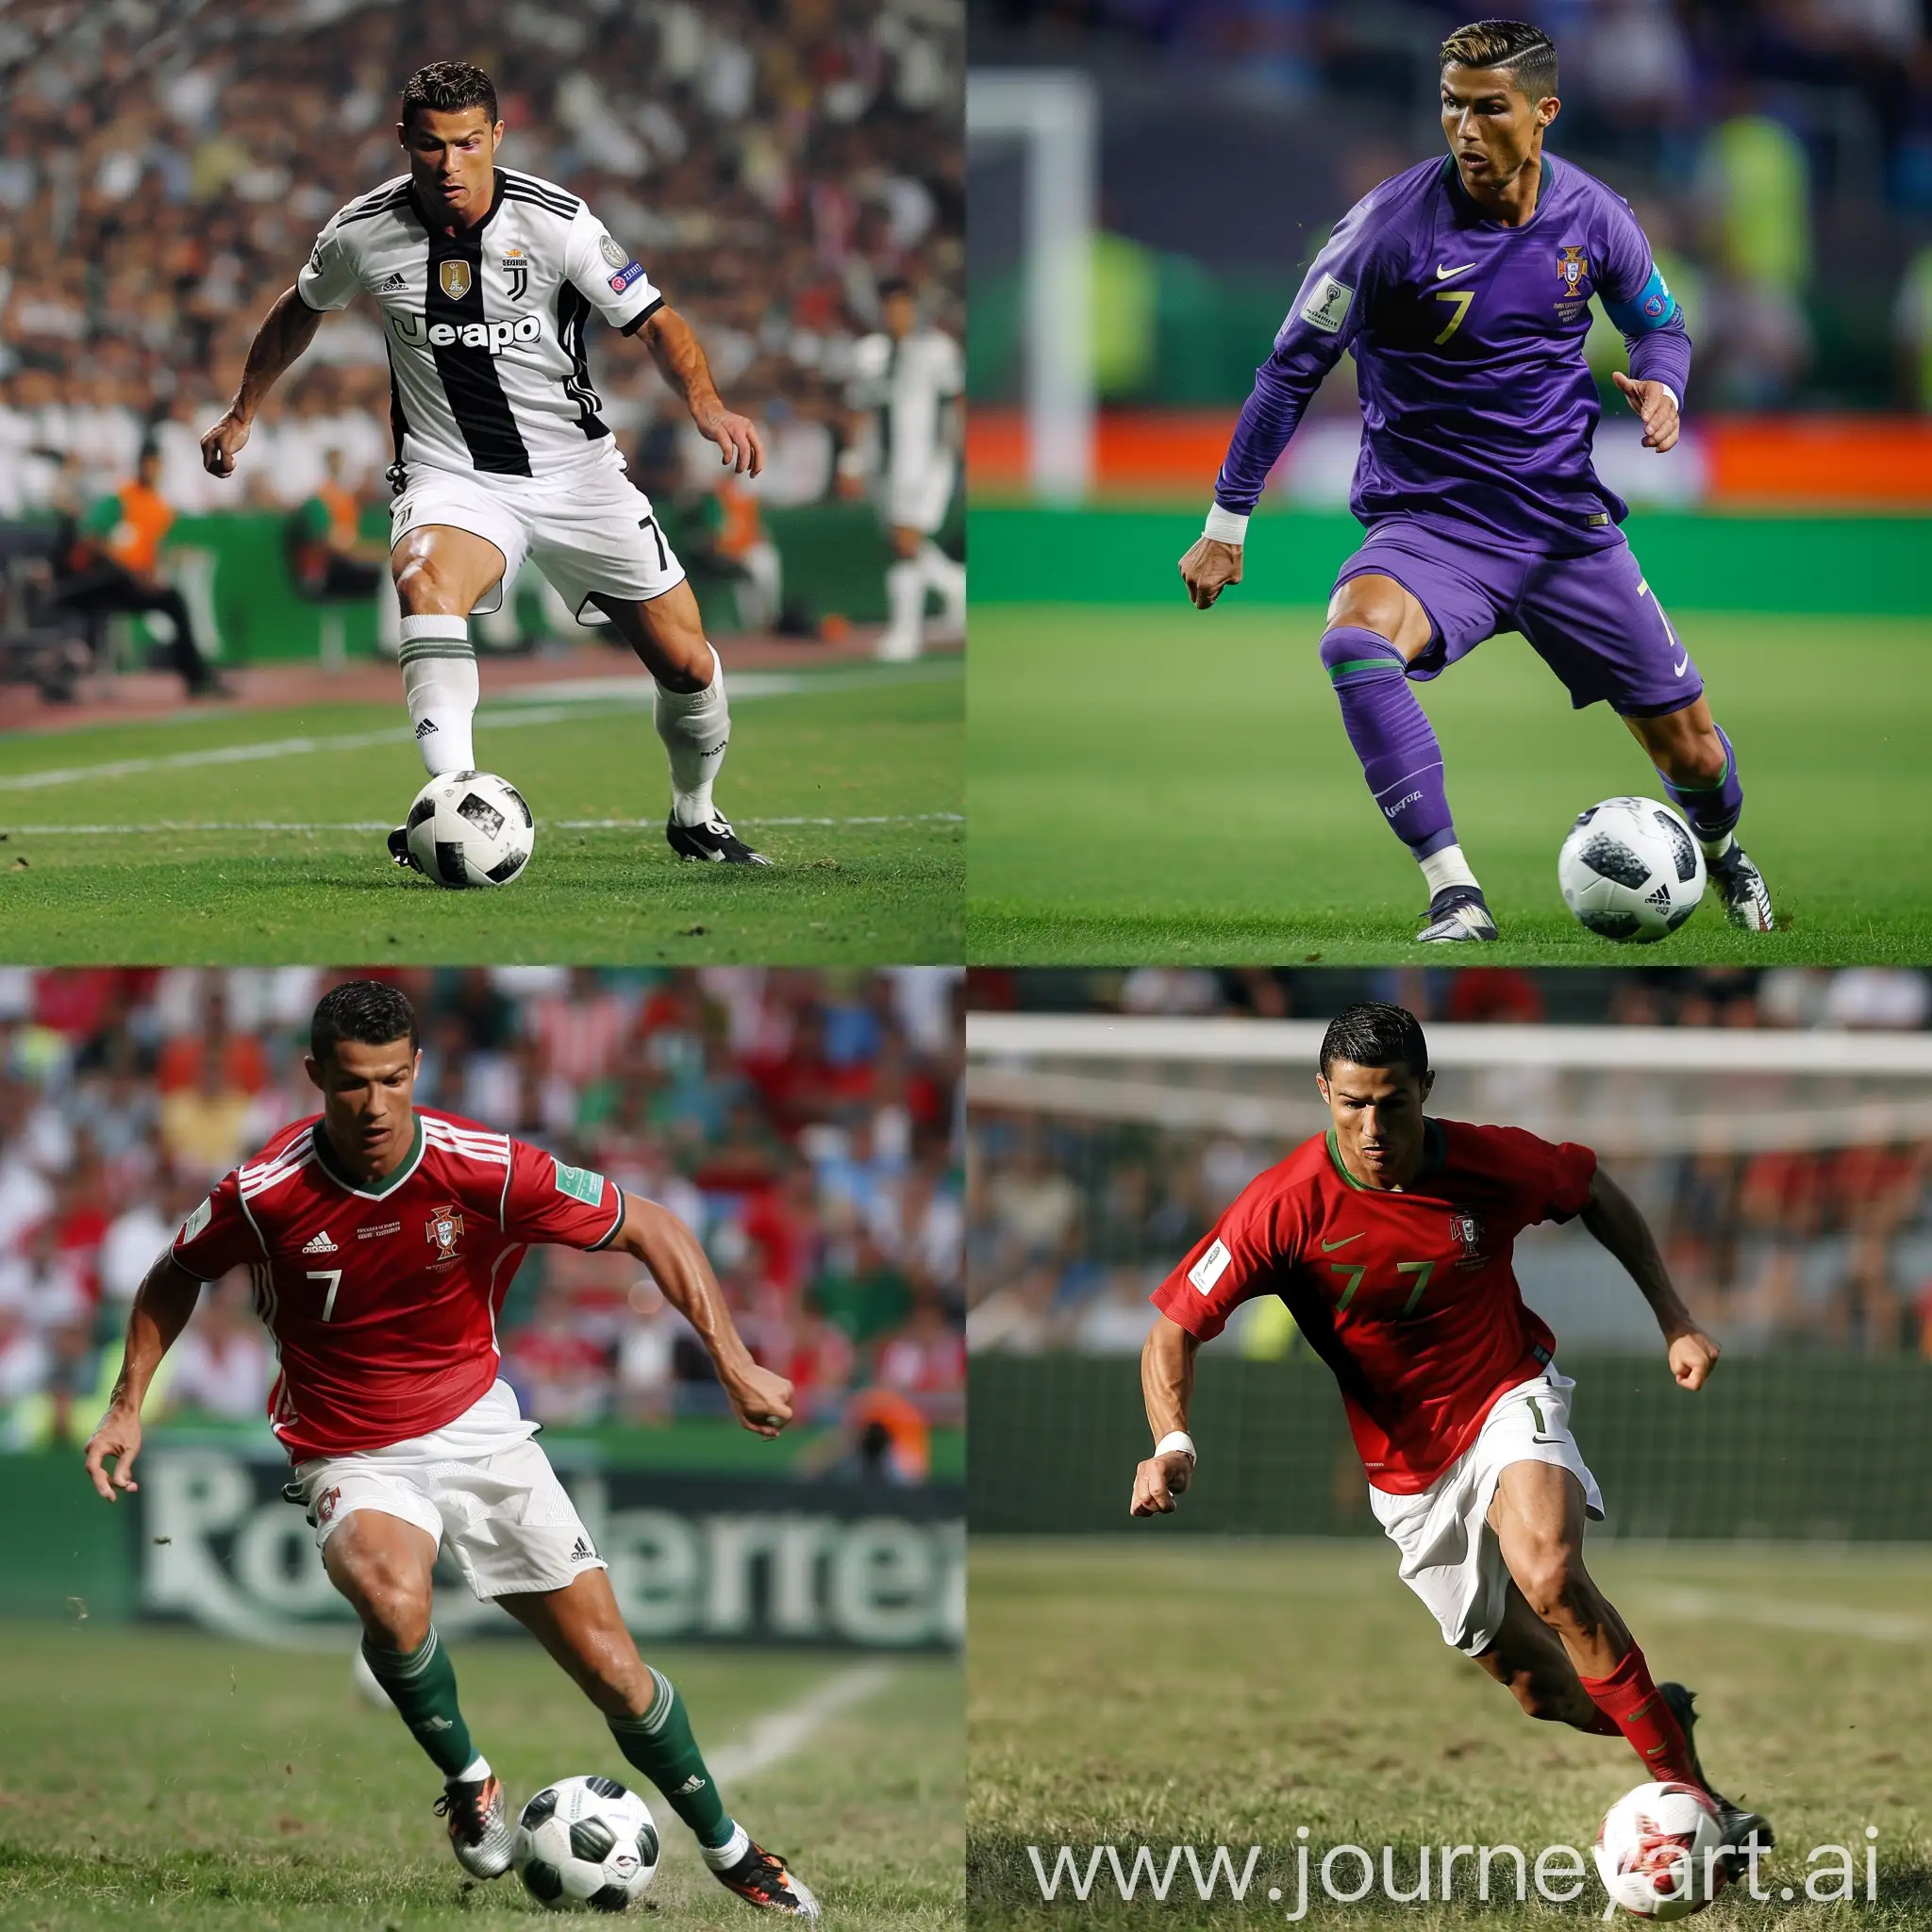 Cristiano-Ronaldo-Playing-Football-in-Dynamic-Action